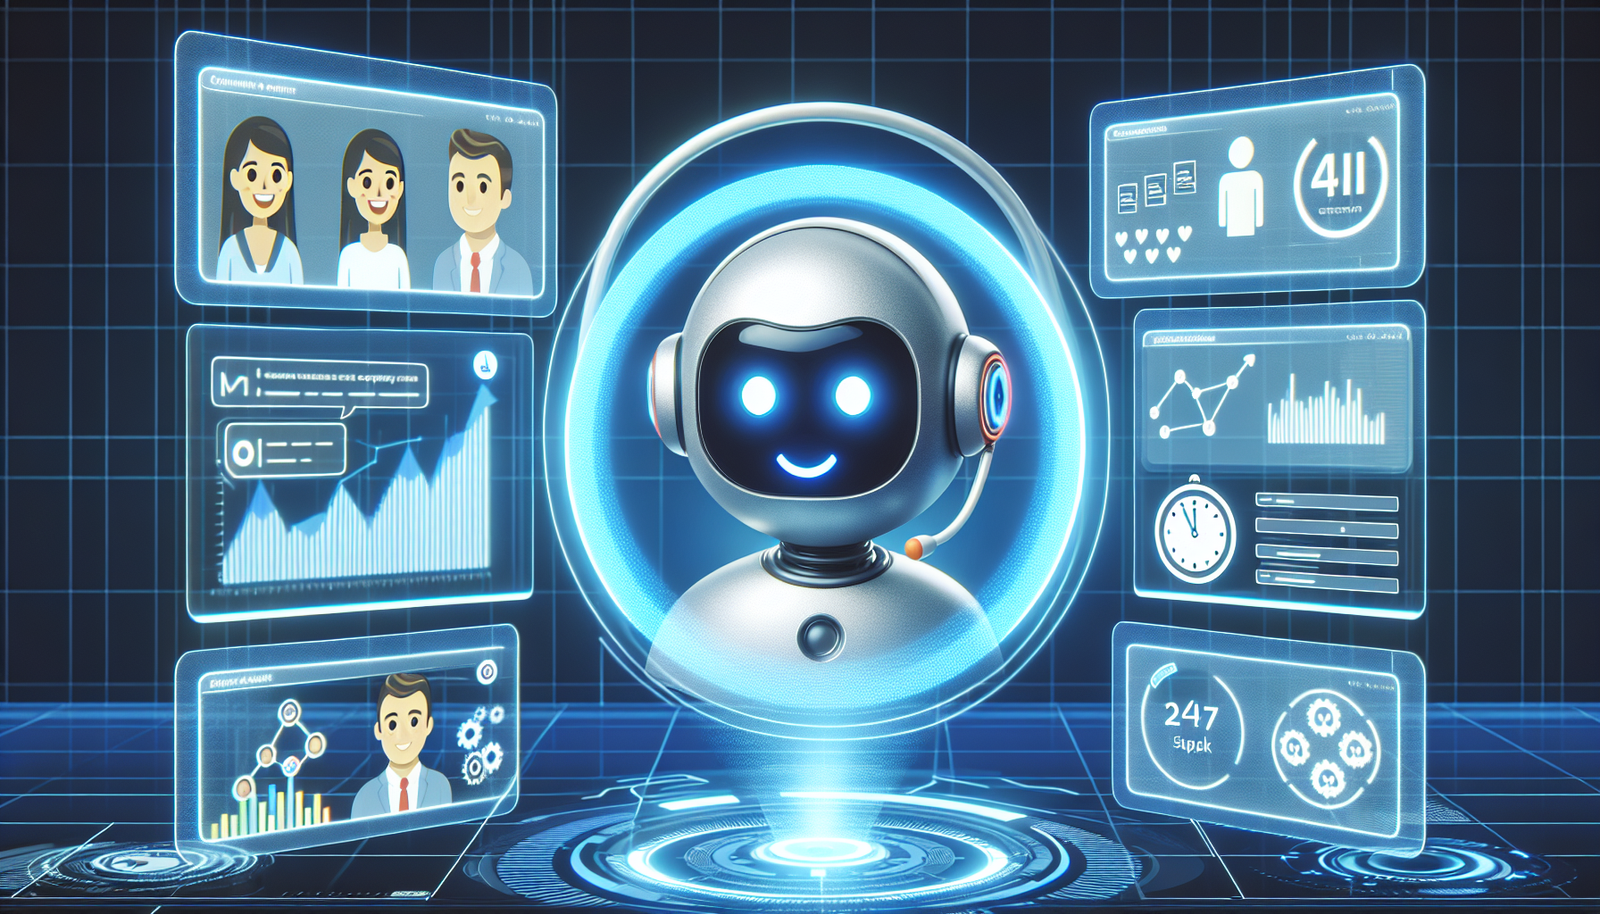 Illustration of maximizing customer satisfaction with AI chatbots understand customer intent